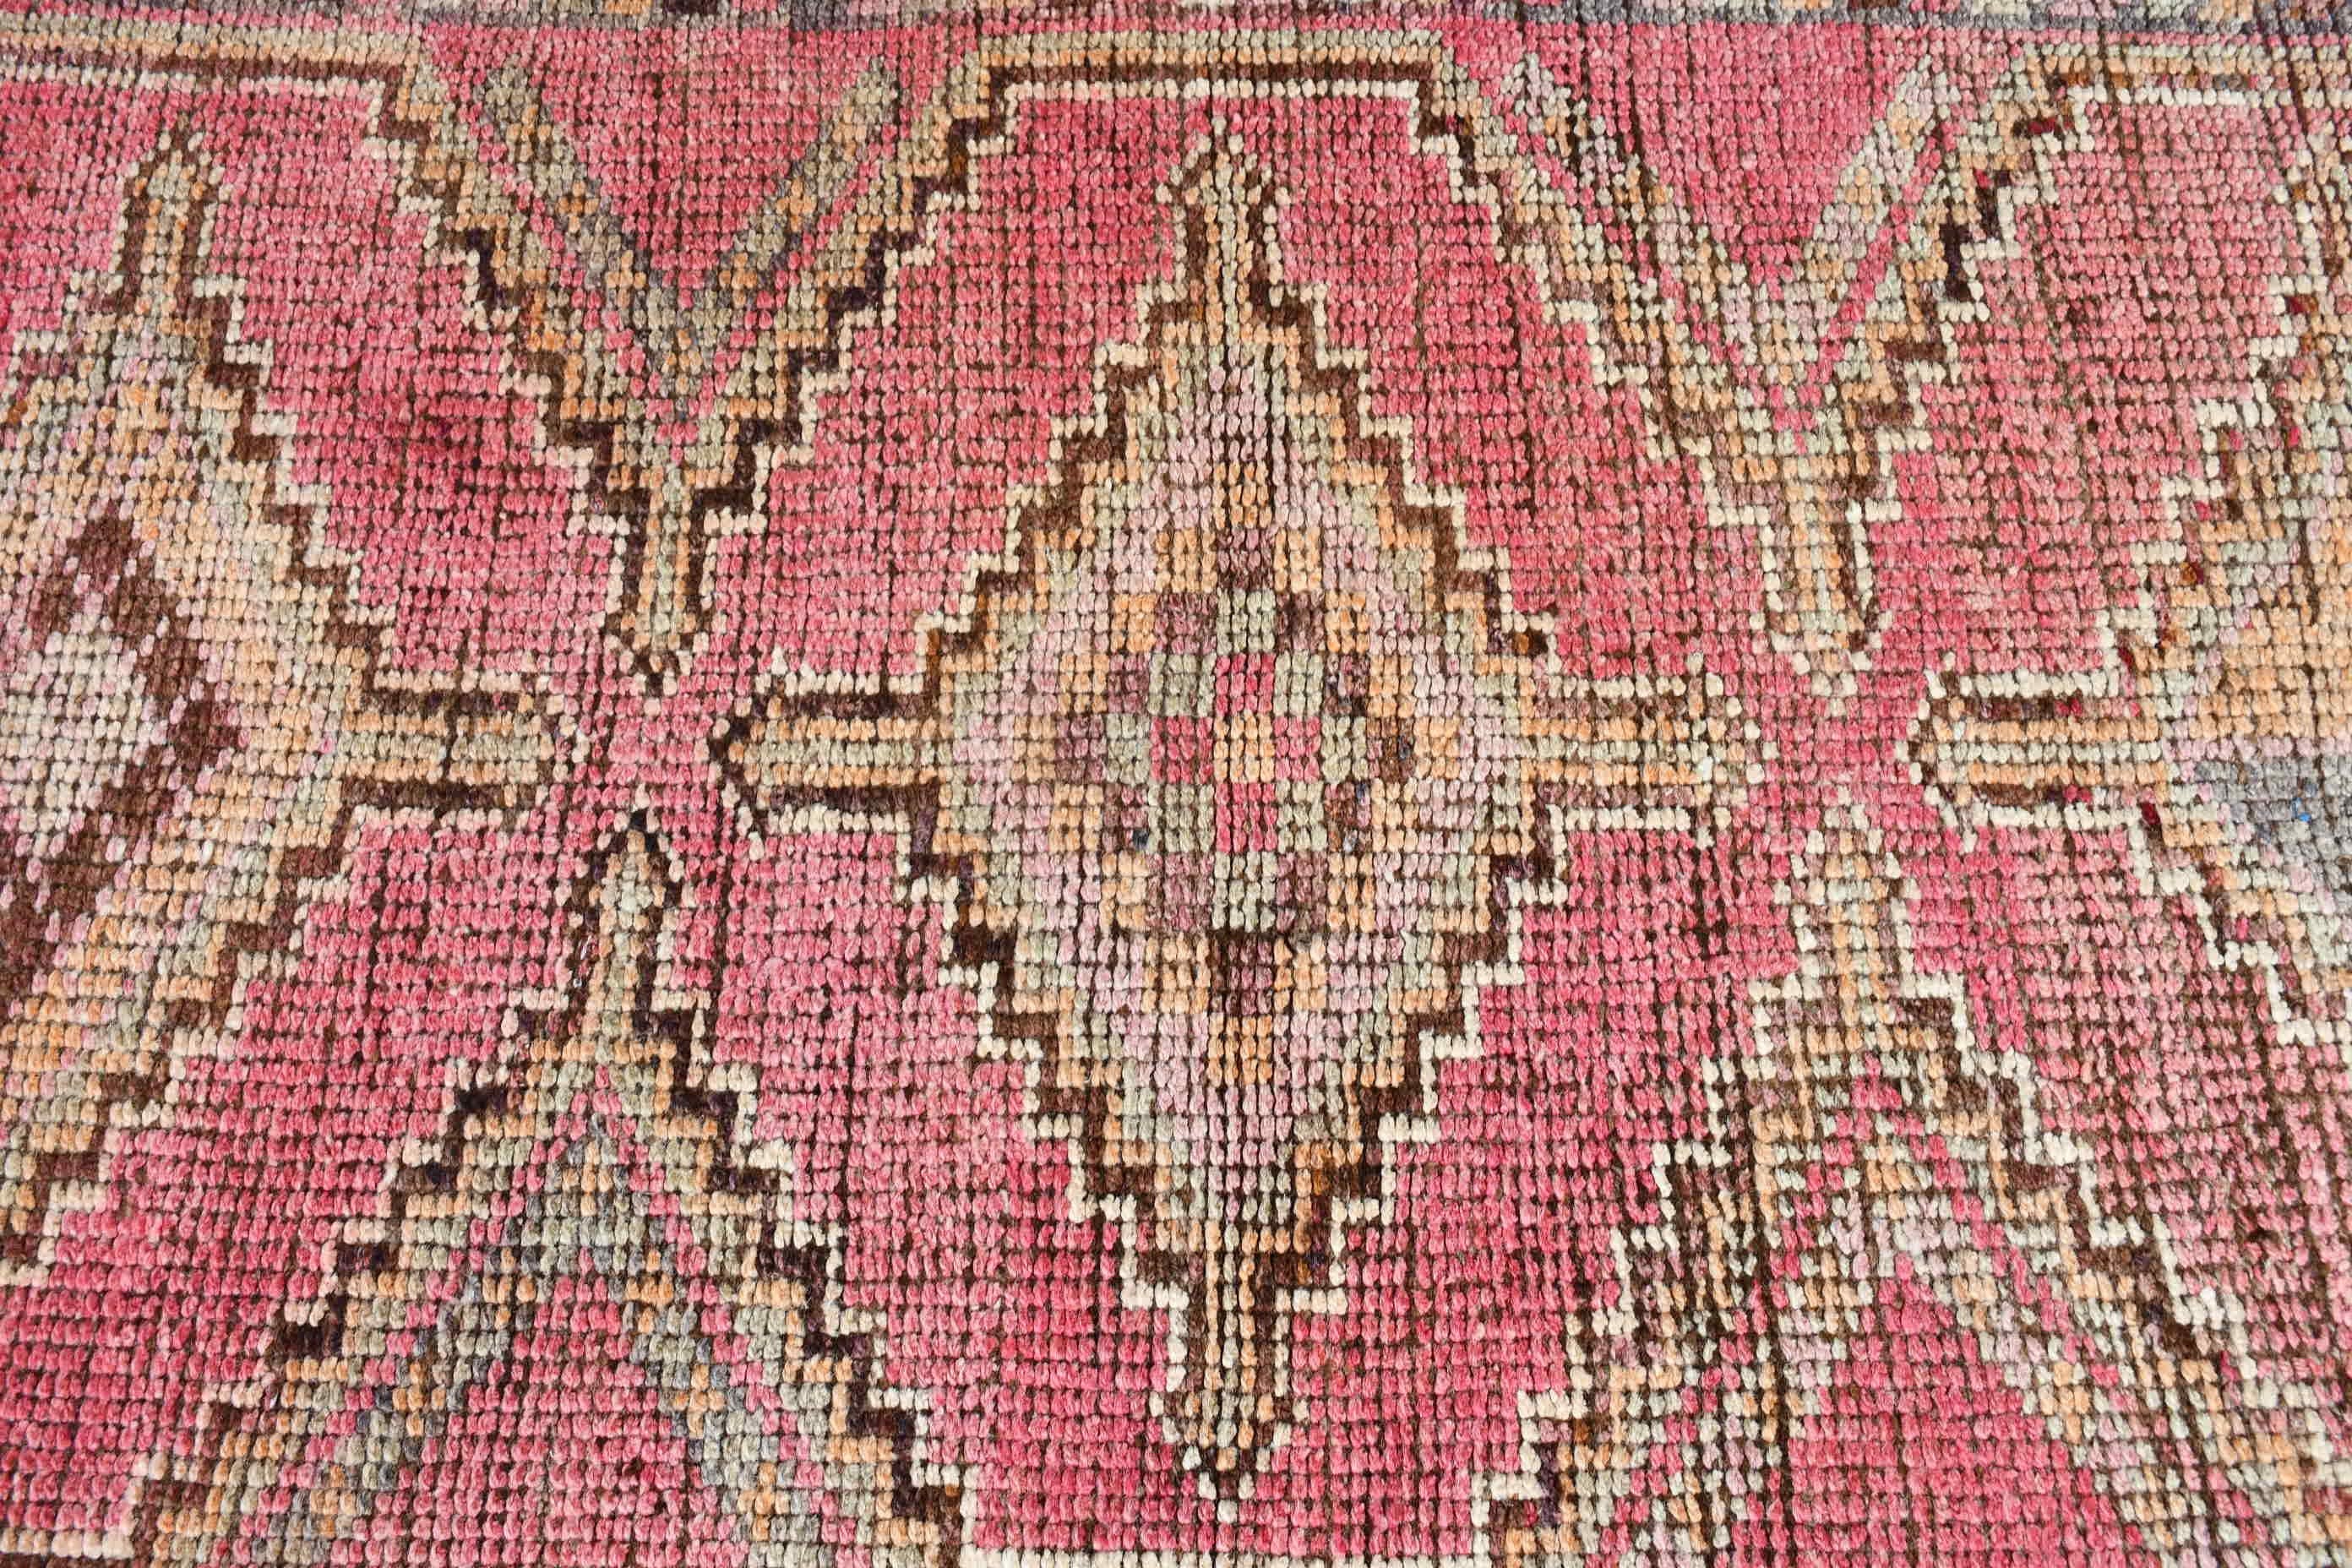 Turkish Rug, 3x10.7 ft Runner Rug, Wool Rugs, Vintage Rug, Pink Oushak Rug, Stair Rug, Rugs for Kitchen, Antique Rugs, Farmhouse Decor Rug